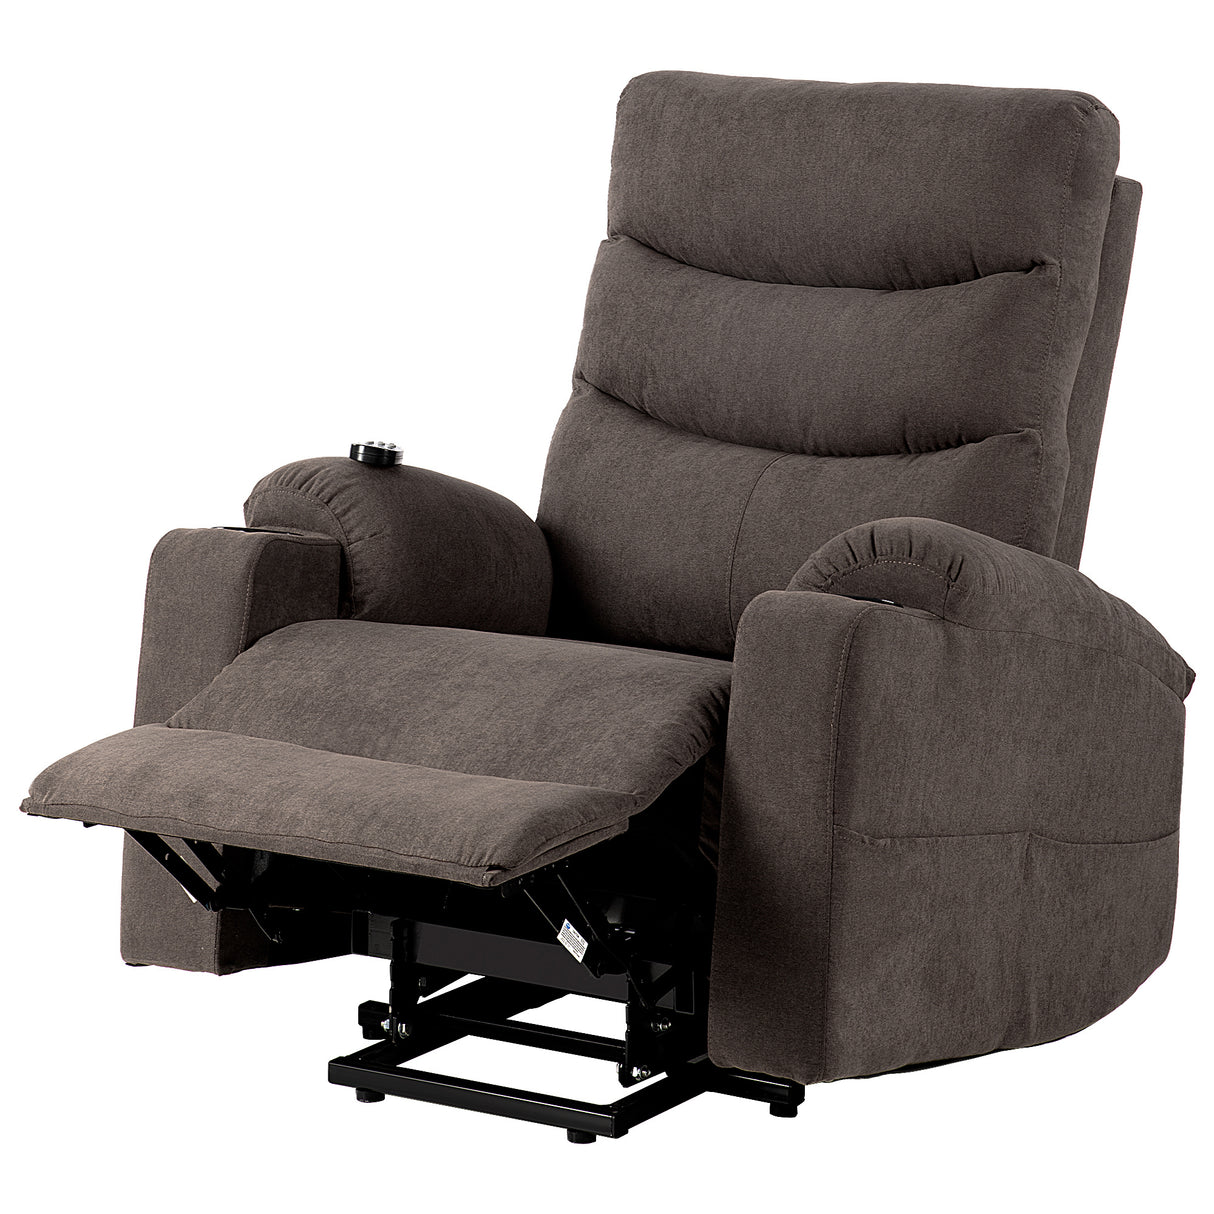 Lift Chairs Recliners for Elderly, Power Reomte Control with Heat and Massage, Upholstered Extra-wide Seat Side Pockets Cup Holders, Fashionable Headrest Thick Cushion (Brown) Home Elegance USA